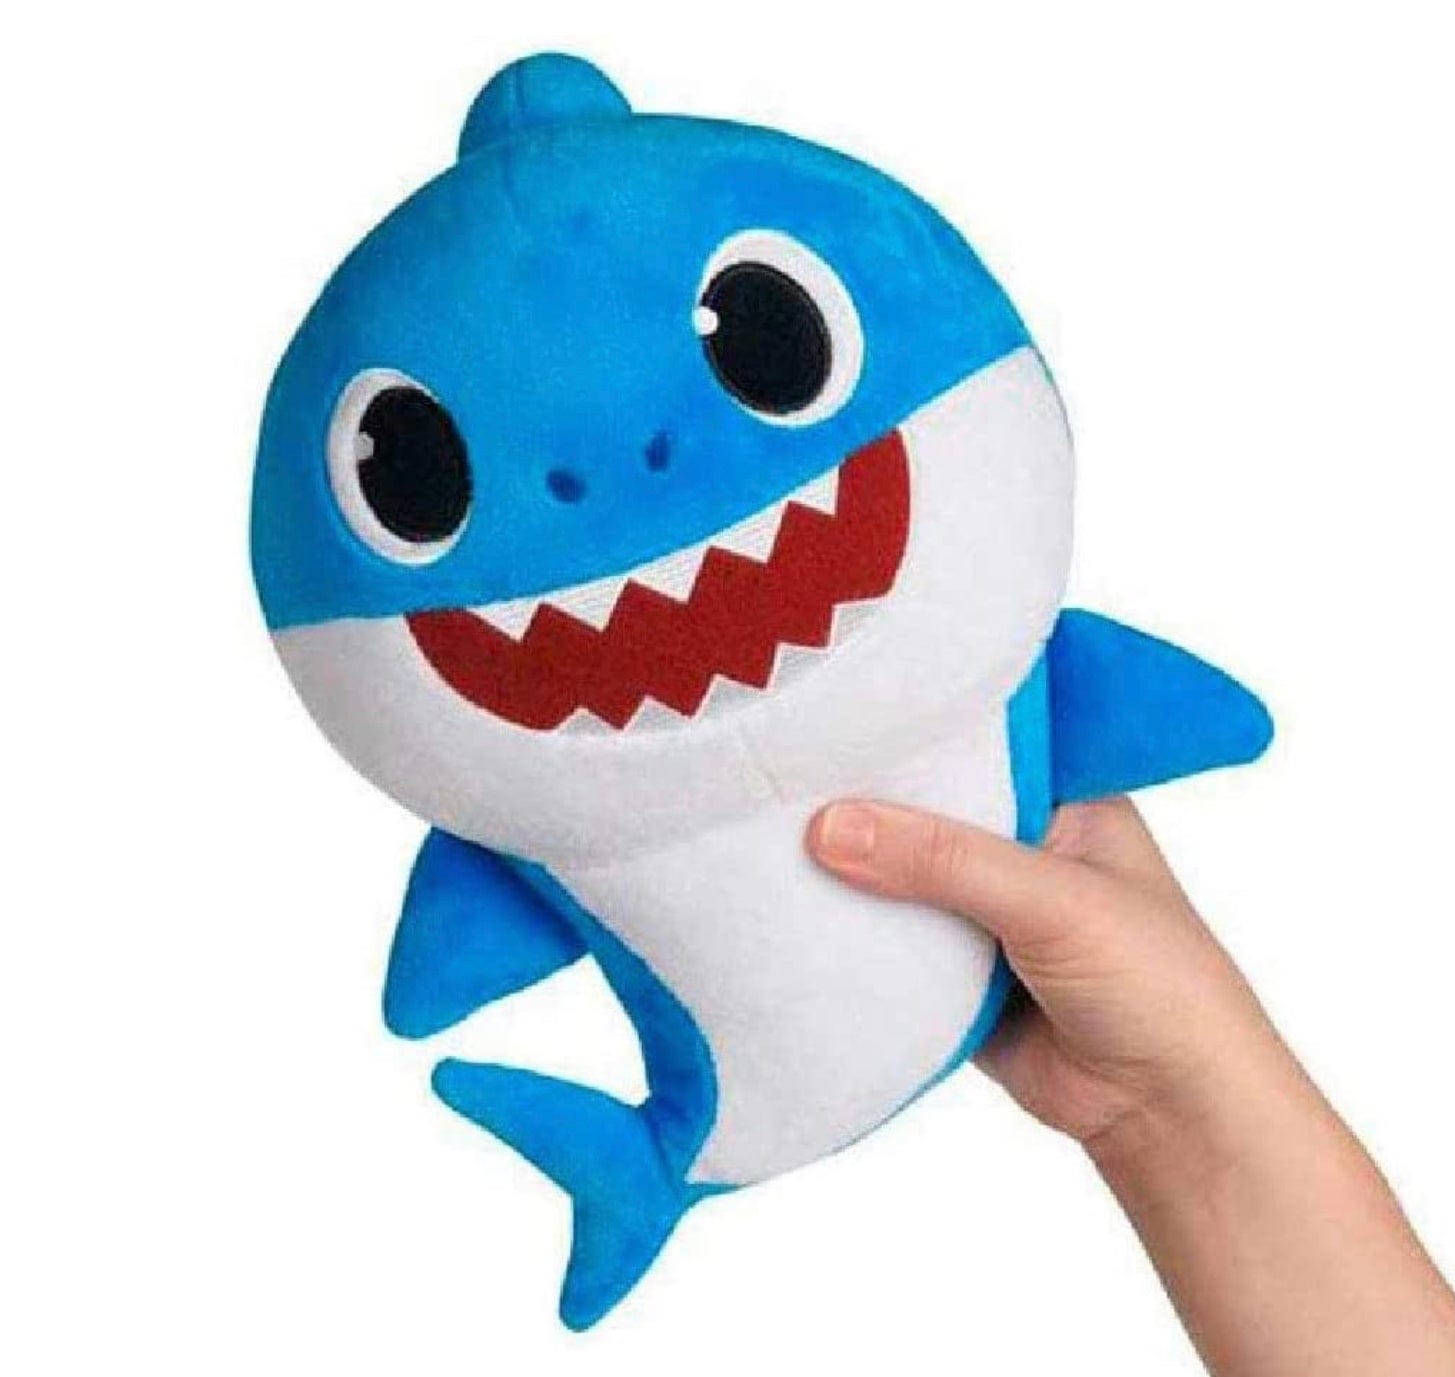 Pinkfong Baby Shark Official 8 inch Plush - Daddy Shark - By WowWee